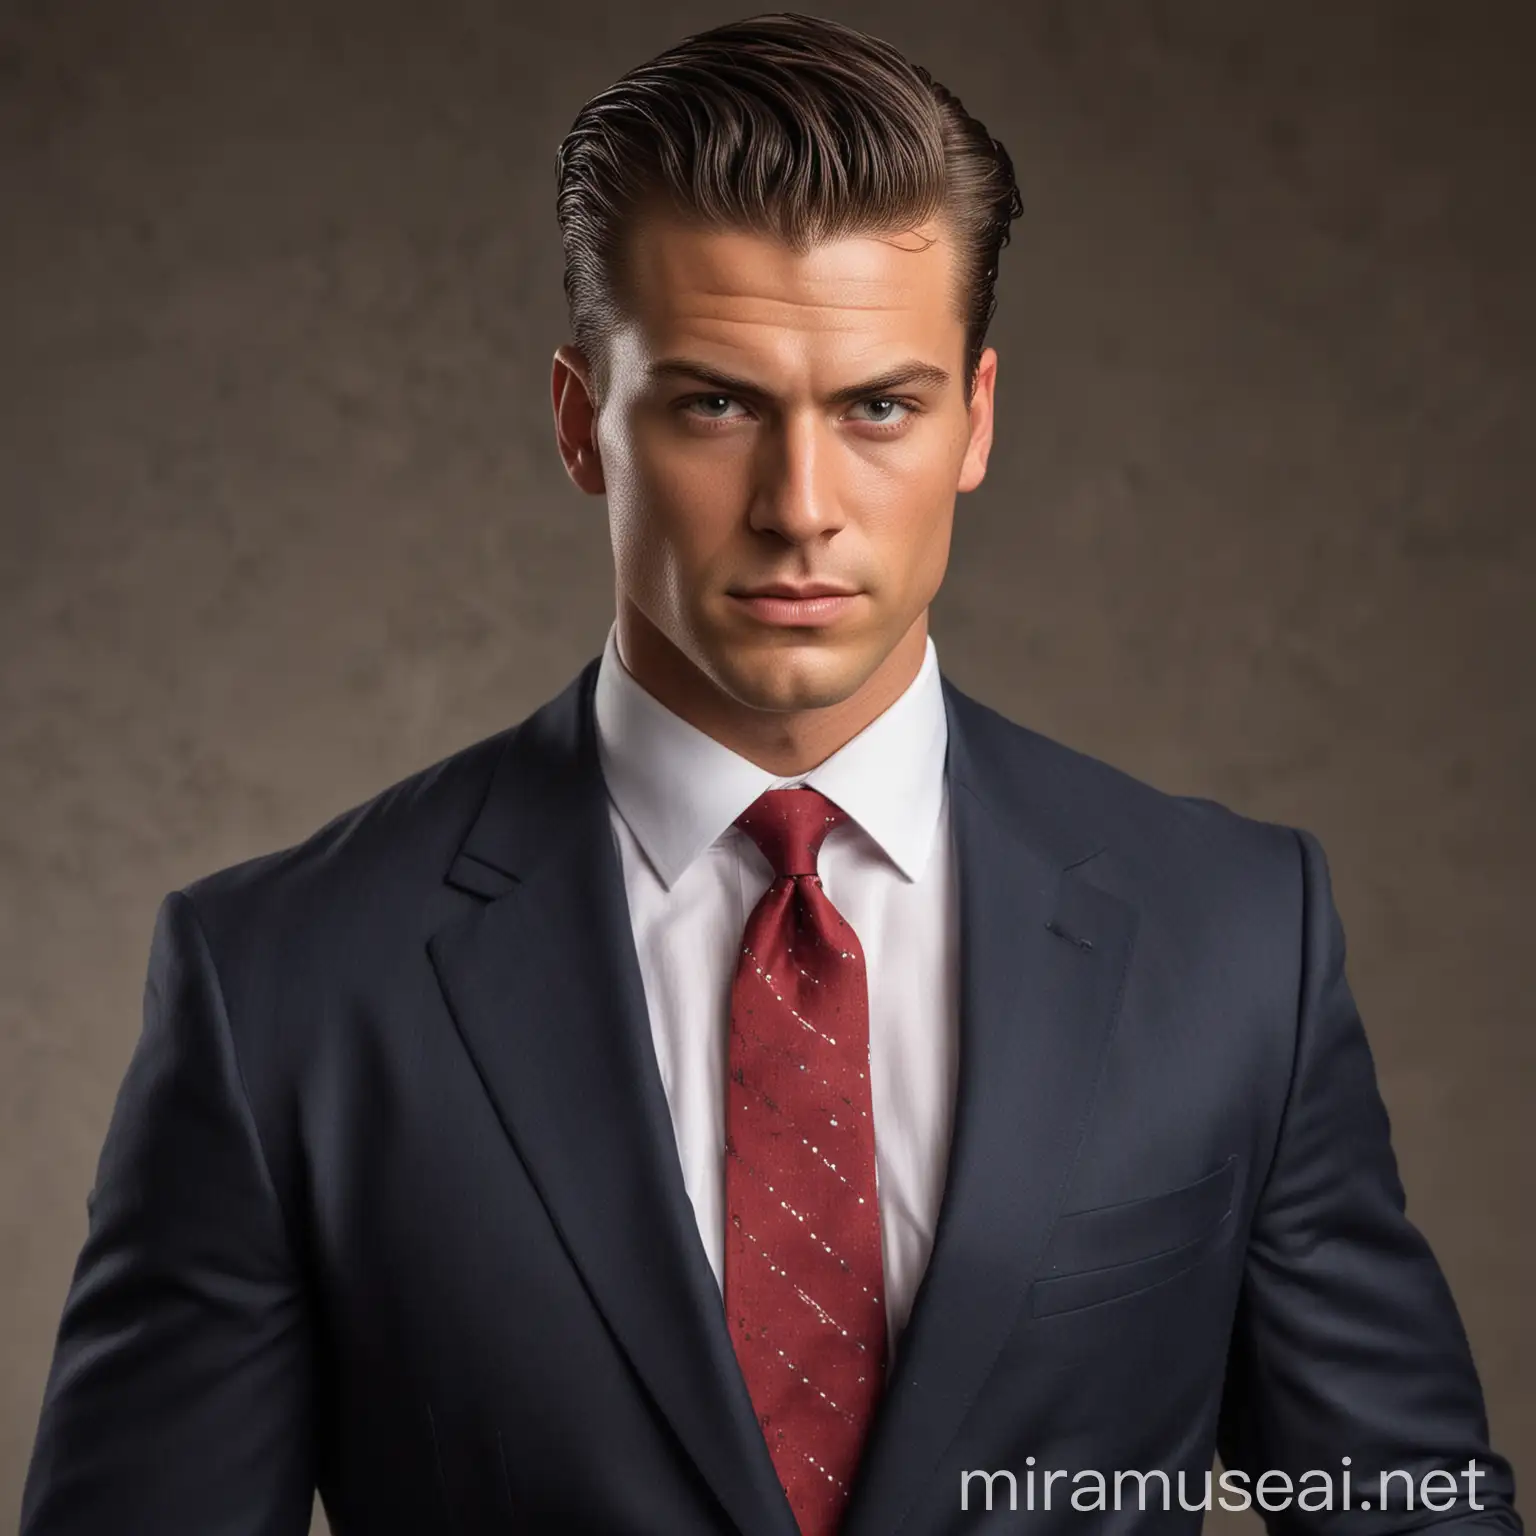 Muscular American Man in Conservative Attire Sweaty and Determined